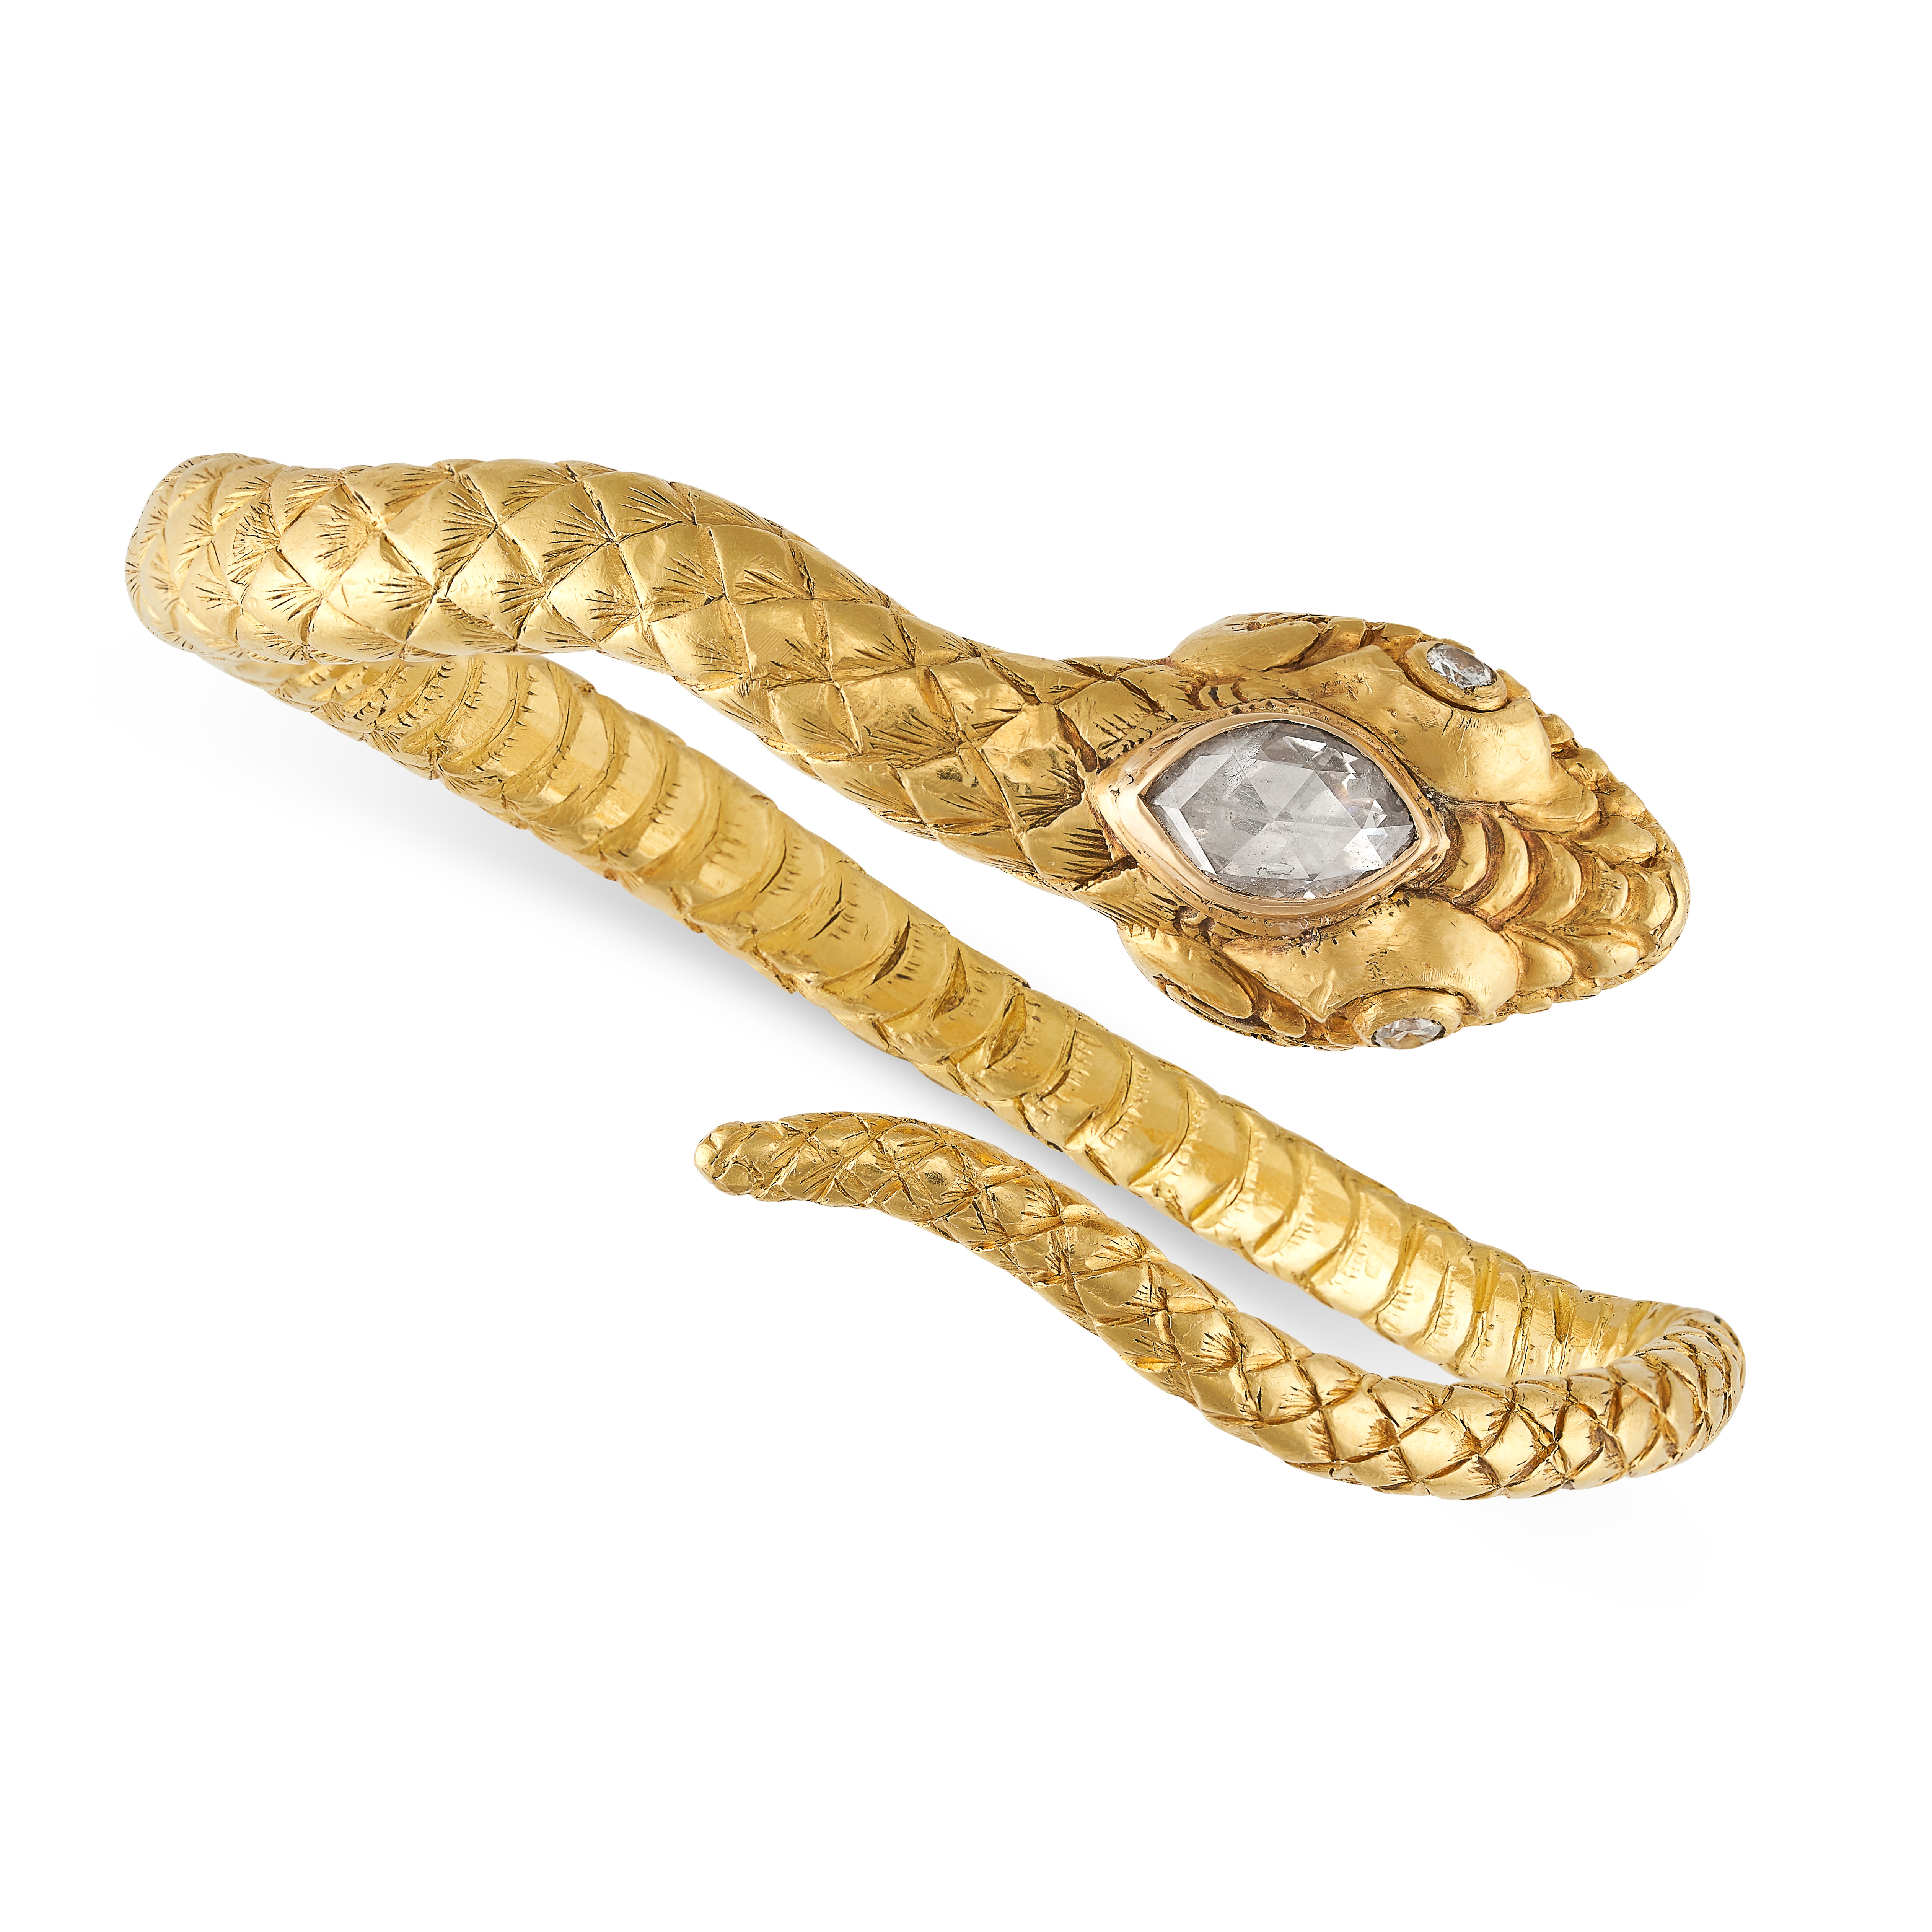 A DIAMOND SNAKE BANGLE in yellow gold, designed as a snake coiled around itself, the head set with a